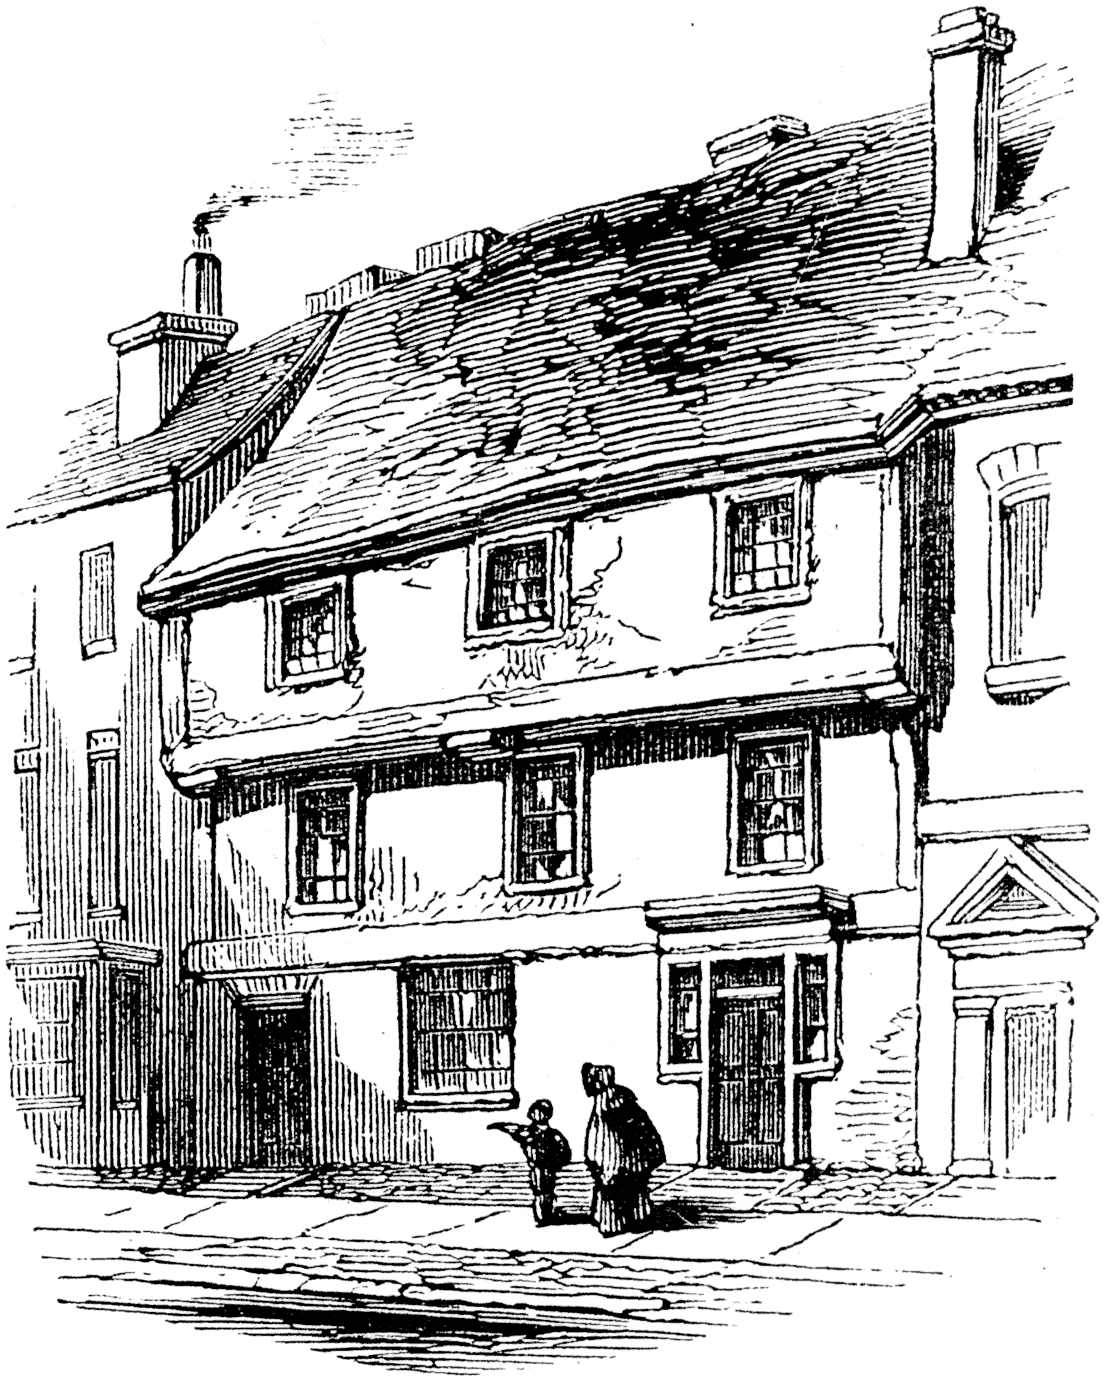 Julius Shaw's house, Stratford upon Avon, 16th century. From James Halliwell 'The Life of William Shakespeare', 1848, page 170. Original published size 5.5cm wide by 6.9cm high.